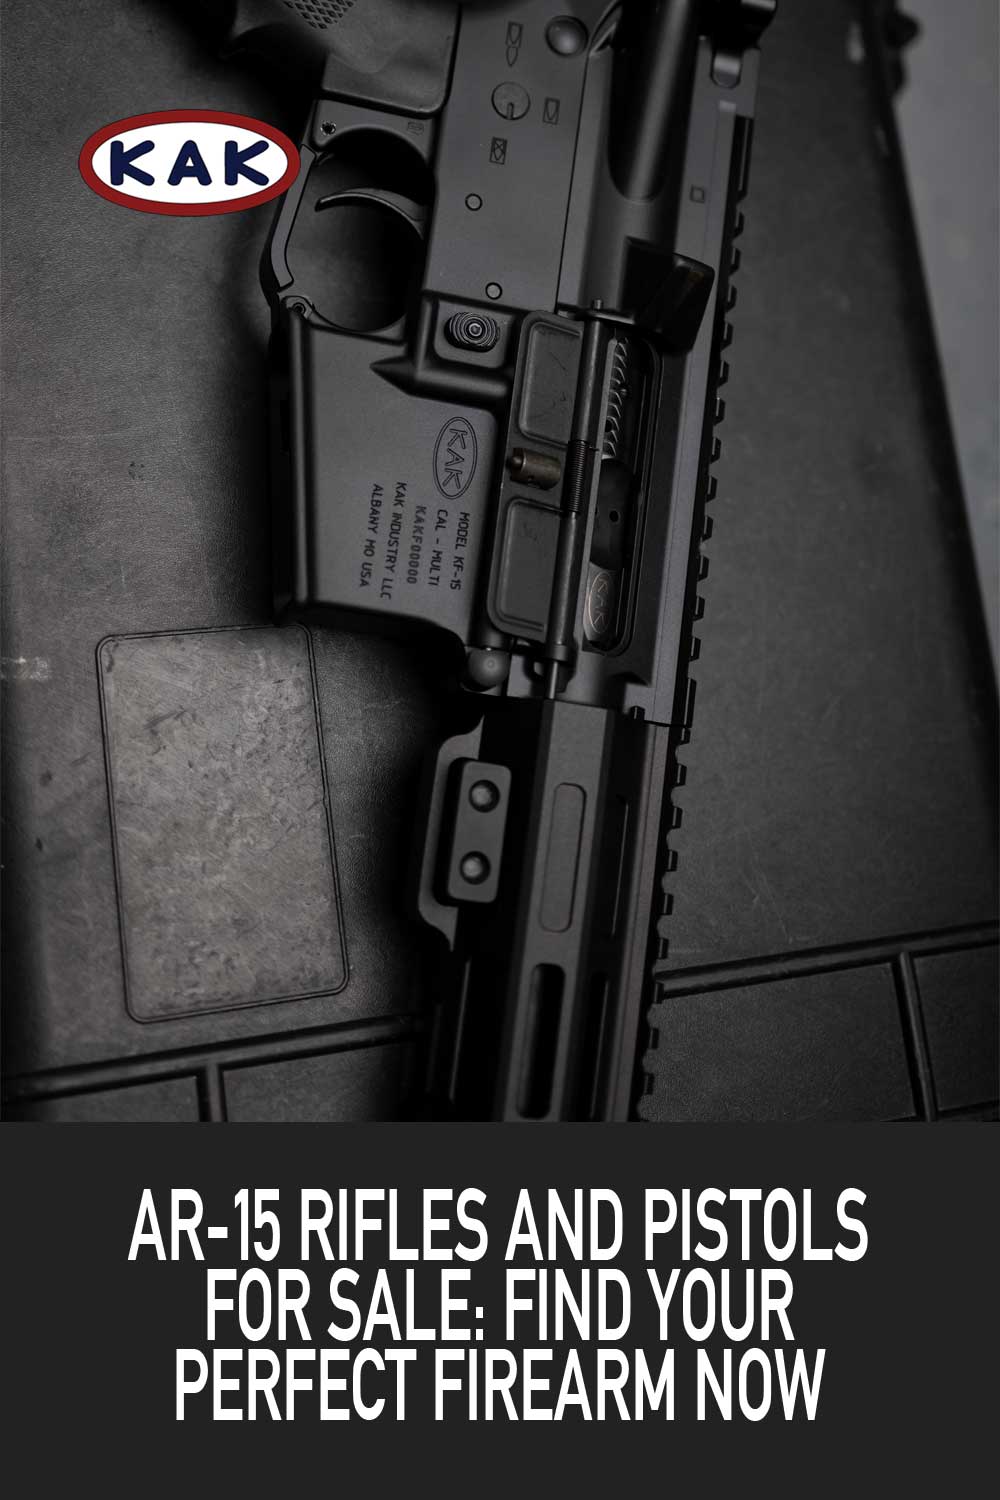 AR-15 Rifles And Pistols for Sale: Find Your Perfect Firearm Now